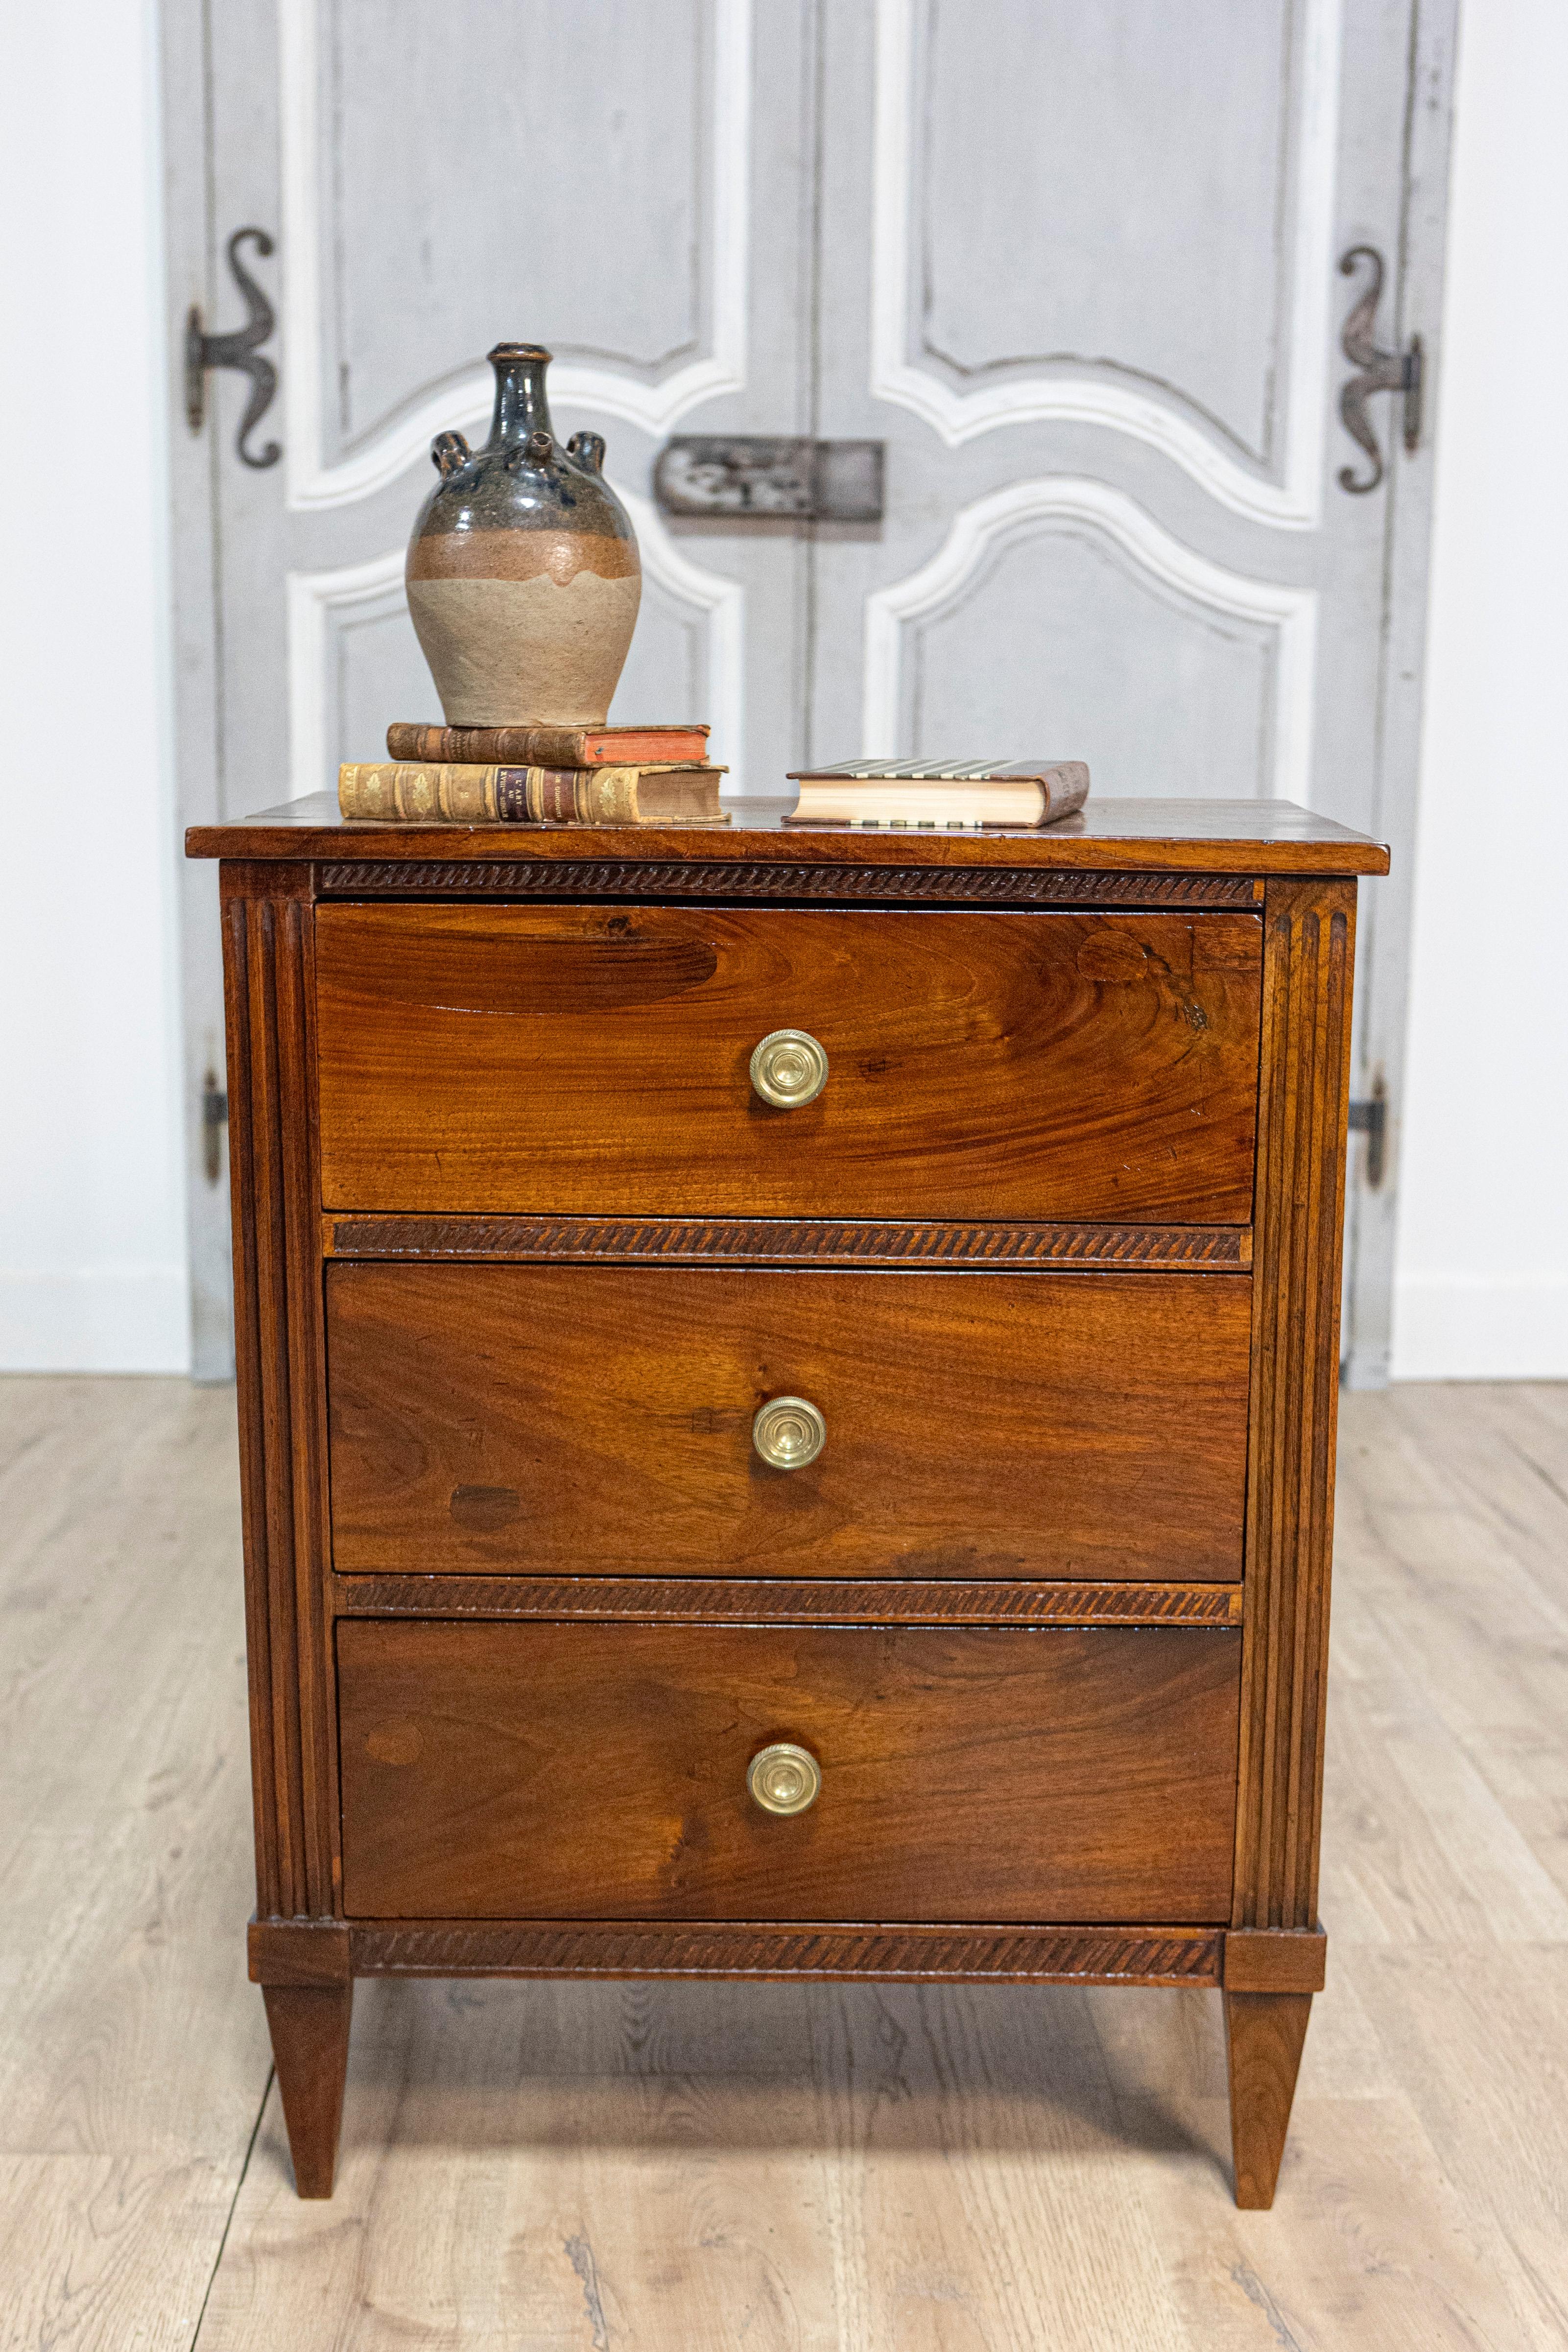 Italian Directoire Period Late 18th Century Three Drawer Walnut Bedside Chest For Sale 9